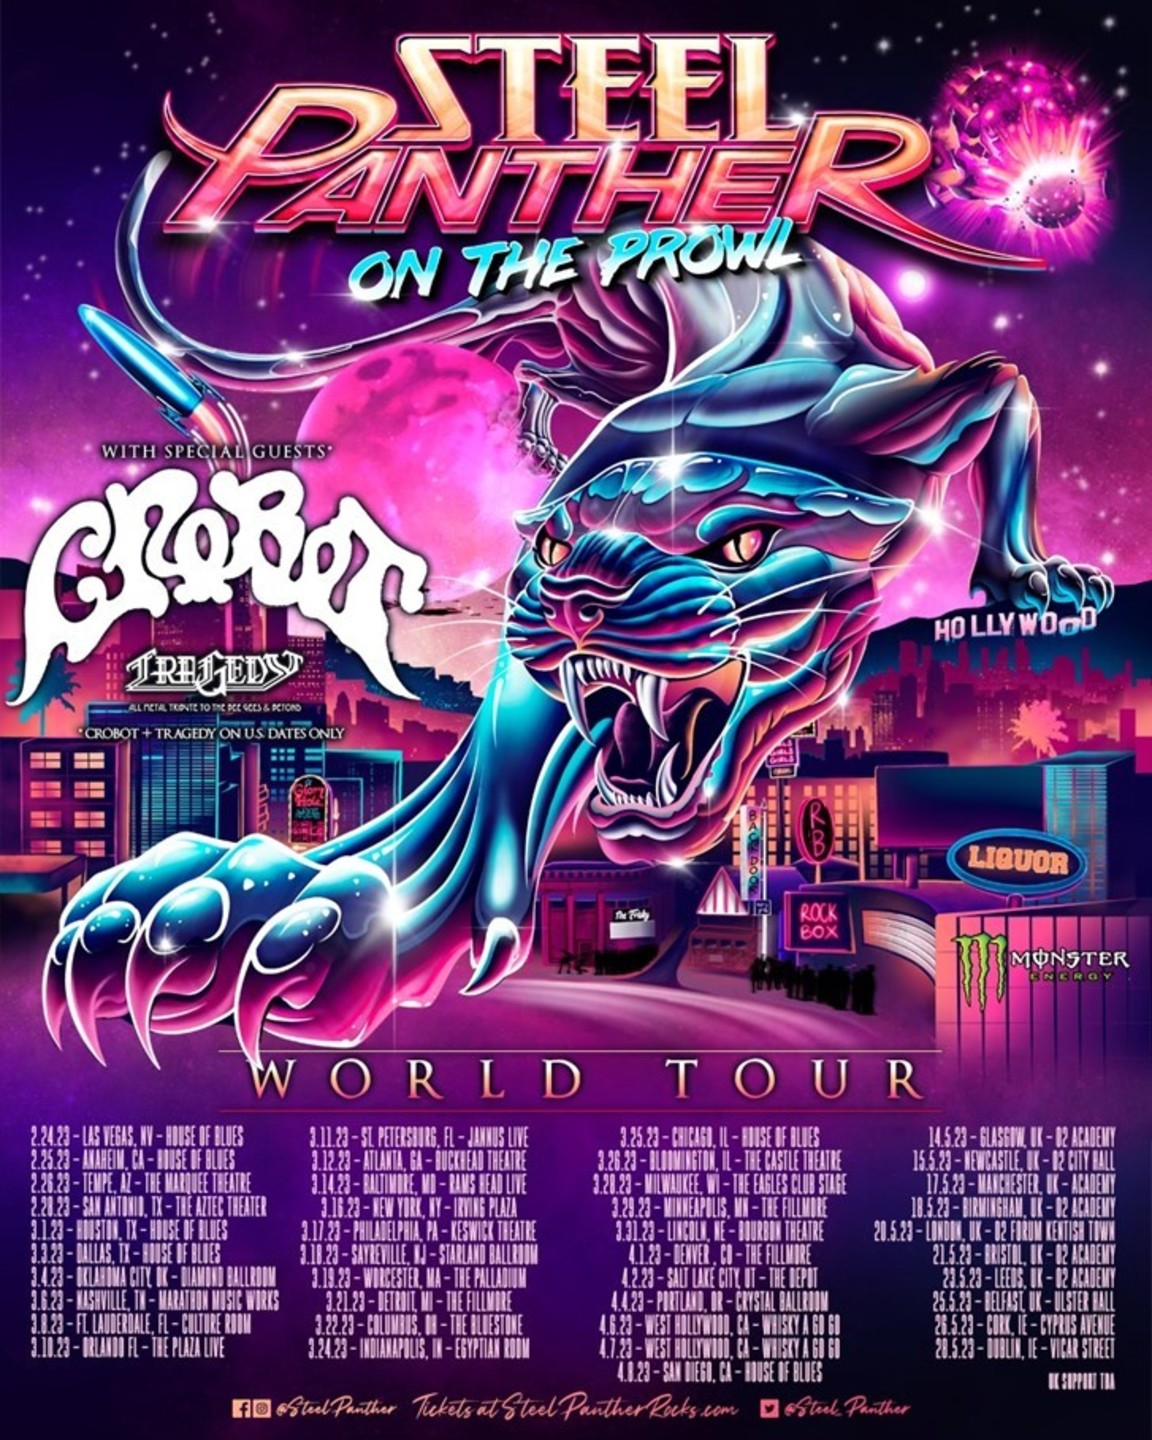 STEEL PANTHER release new video & tour dates Outsider Rock